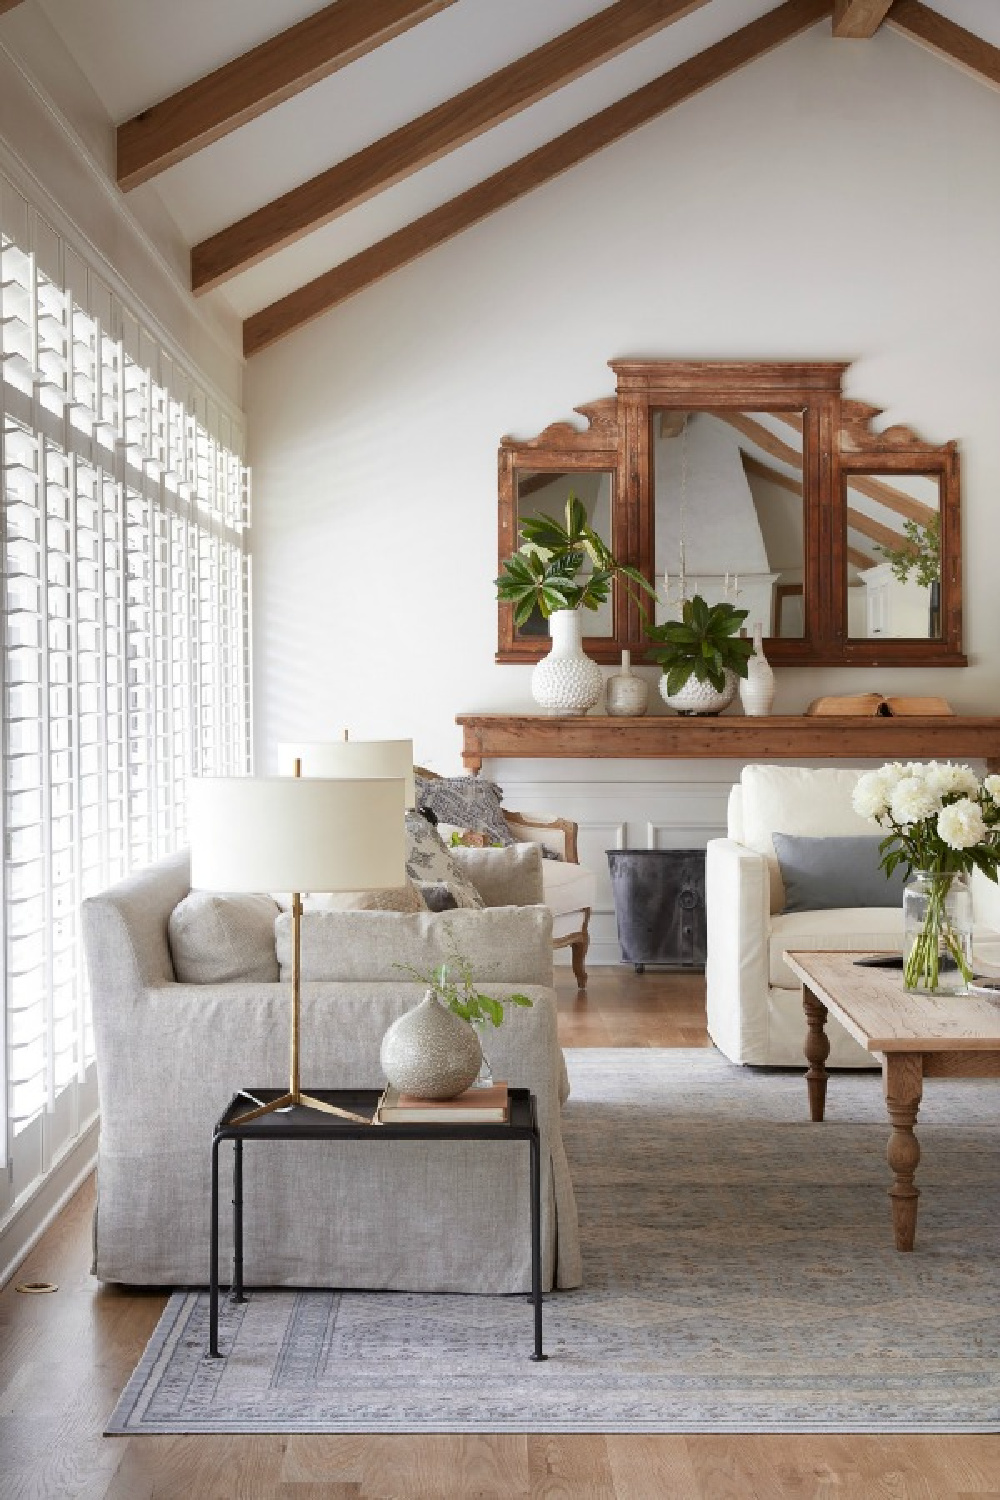 French country living room on Fixer Upper in Episode 11 of Season 5 - The Club House. #Joanna Gaines #fixerupper #interiordesign #getthelook